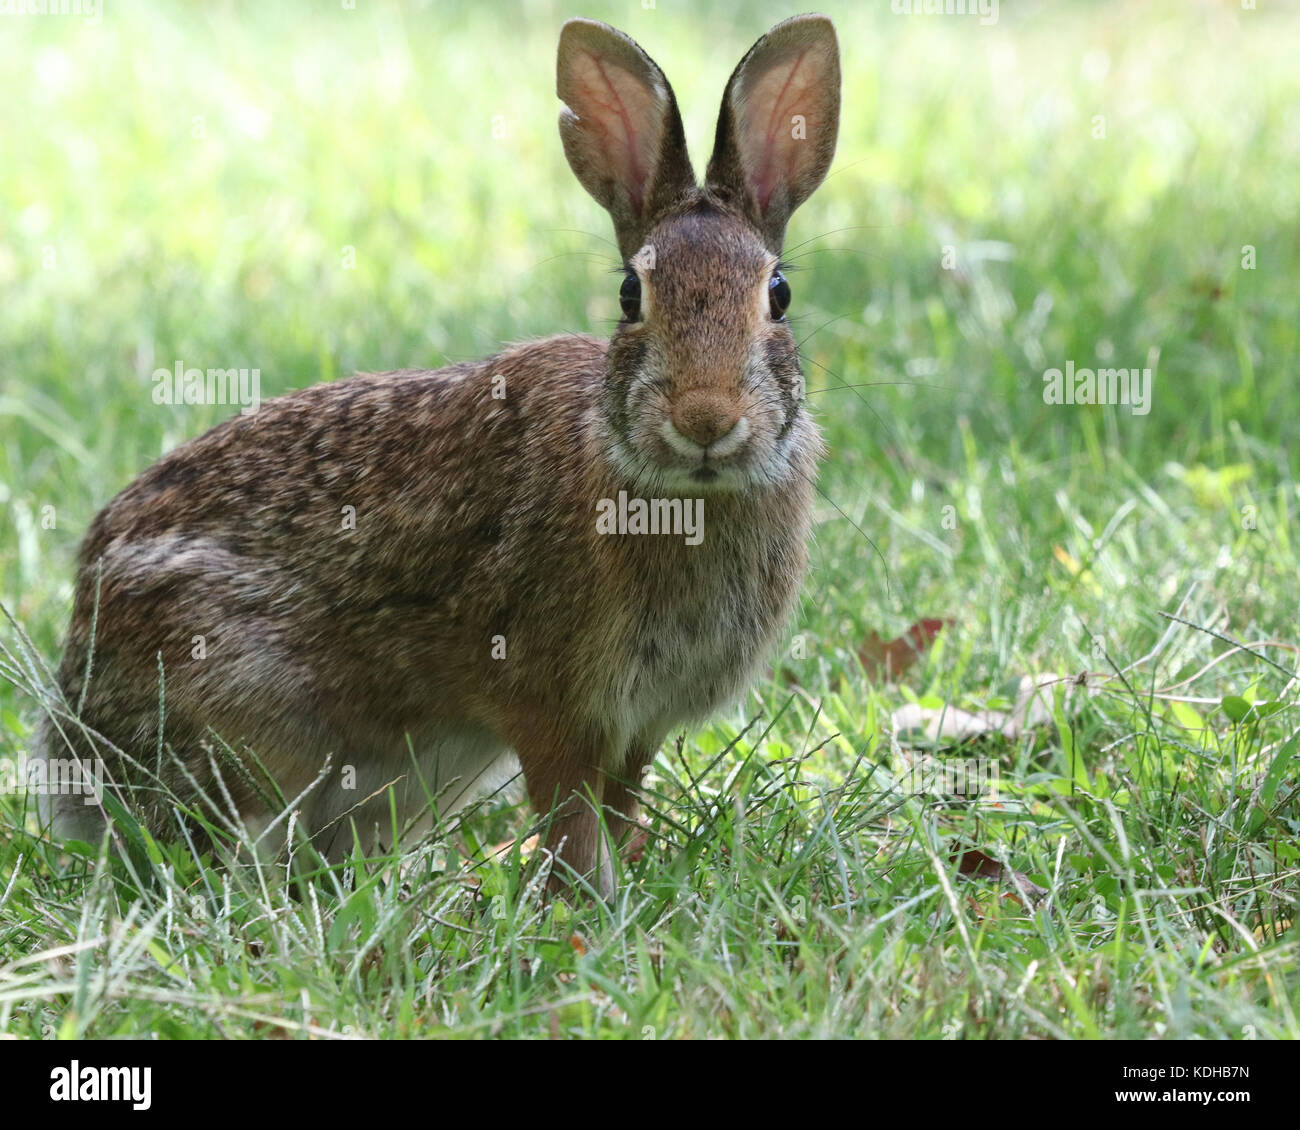 Surprised Eastern Cottontail rabbit standing in grass Stock Photo